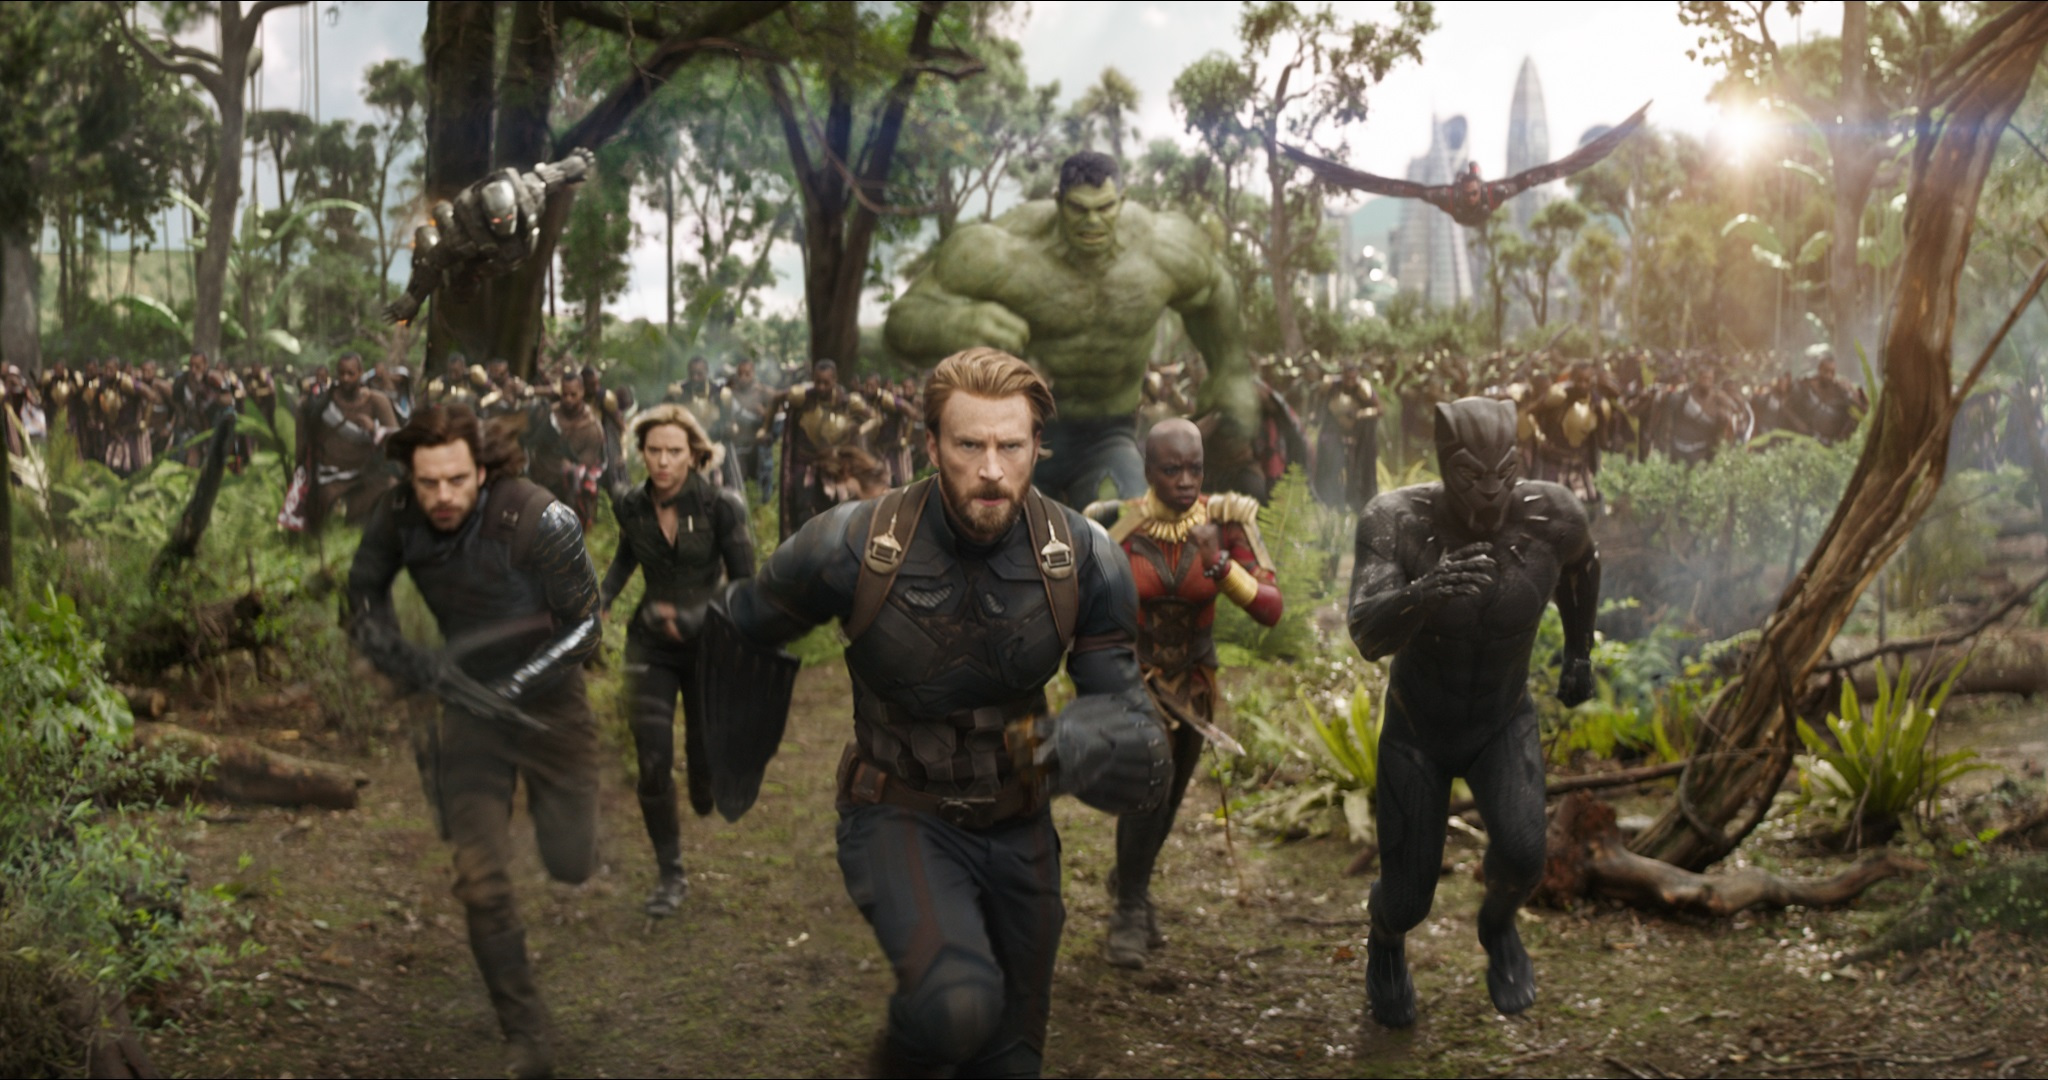 Avengers Endgame Crazy Fan Theory What If The Wakanda Scene From The Infinity War Trailer Is Actually The Final Battle In Endgame (2)